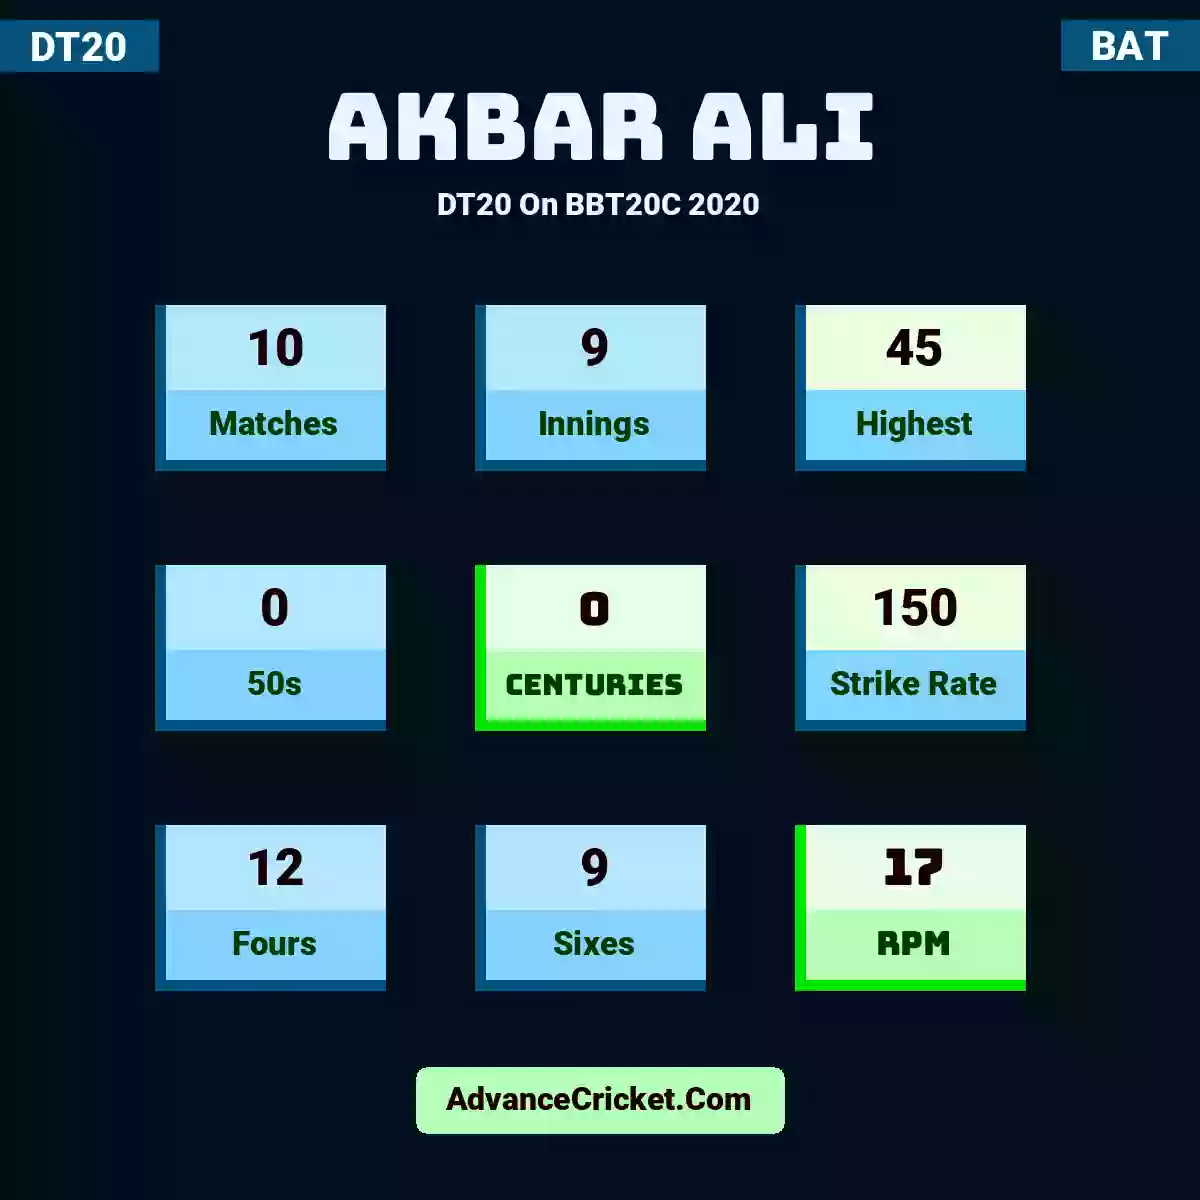 Akbar Ali DT20  On BBT20C 2020, Akbar Ali played 10 matches, scored 45 runs as highest, 0 half-centuries, and 0 centuries, with a strike rate of 150. A.Ali hit 12 fours and 9 sixes, with an RPM of 17.